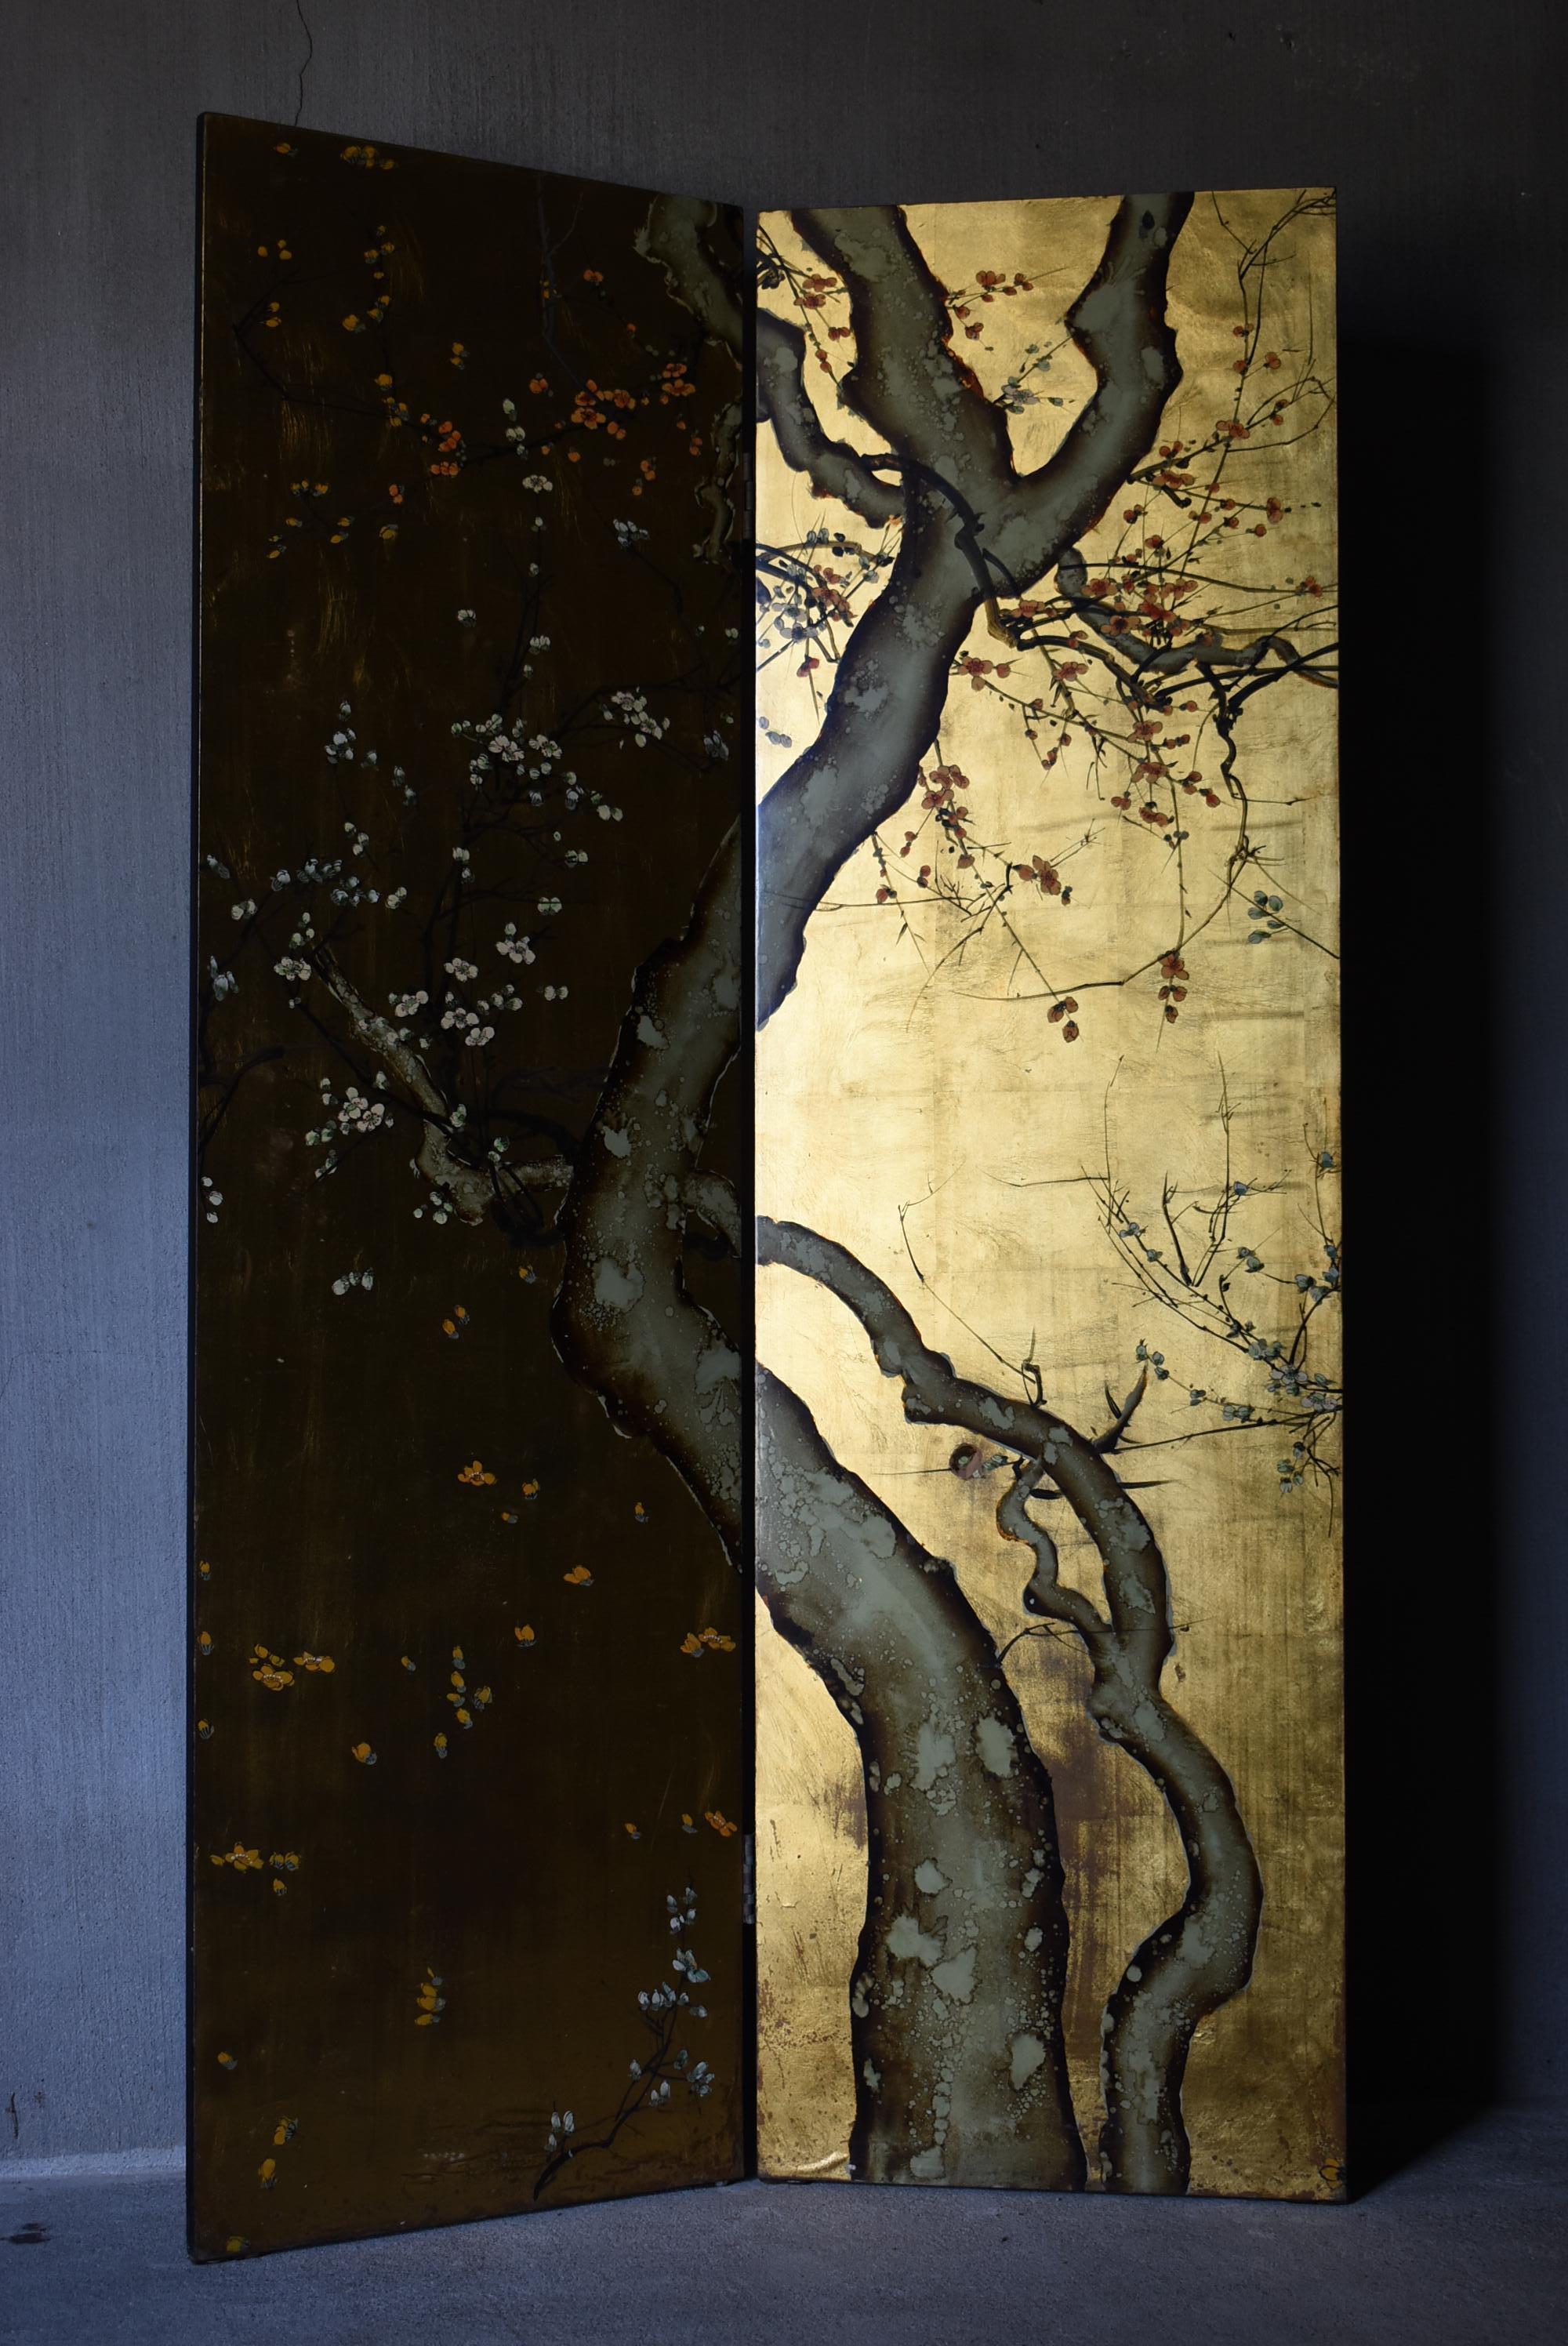 This is a very old folding screen made in Japan.
It is from the early Showa period (1920s-1940s).
It is made of wooden panels with lacquered pictures.

The surface is painted with a plum tree against a golden background.
The reverse side depicts a